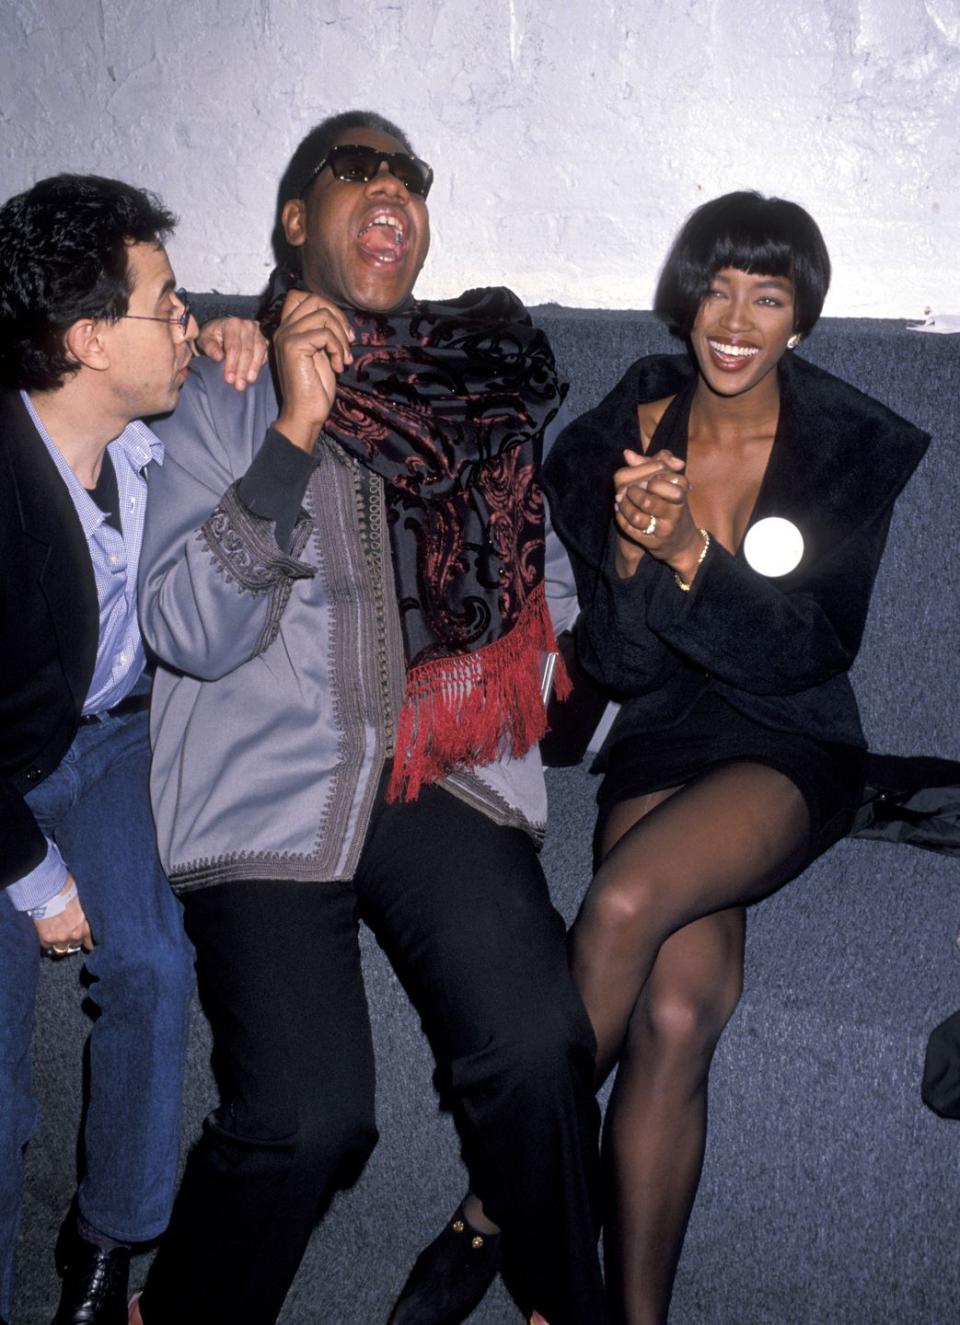 <p>Talley shares a laugh with supermodel Naomi Campbell at a party, rocking his signature black sunglasses on top of a formal suit. </p>